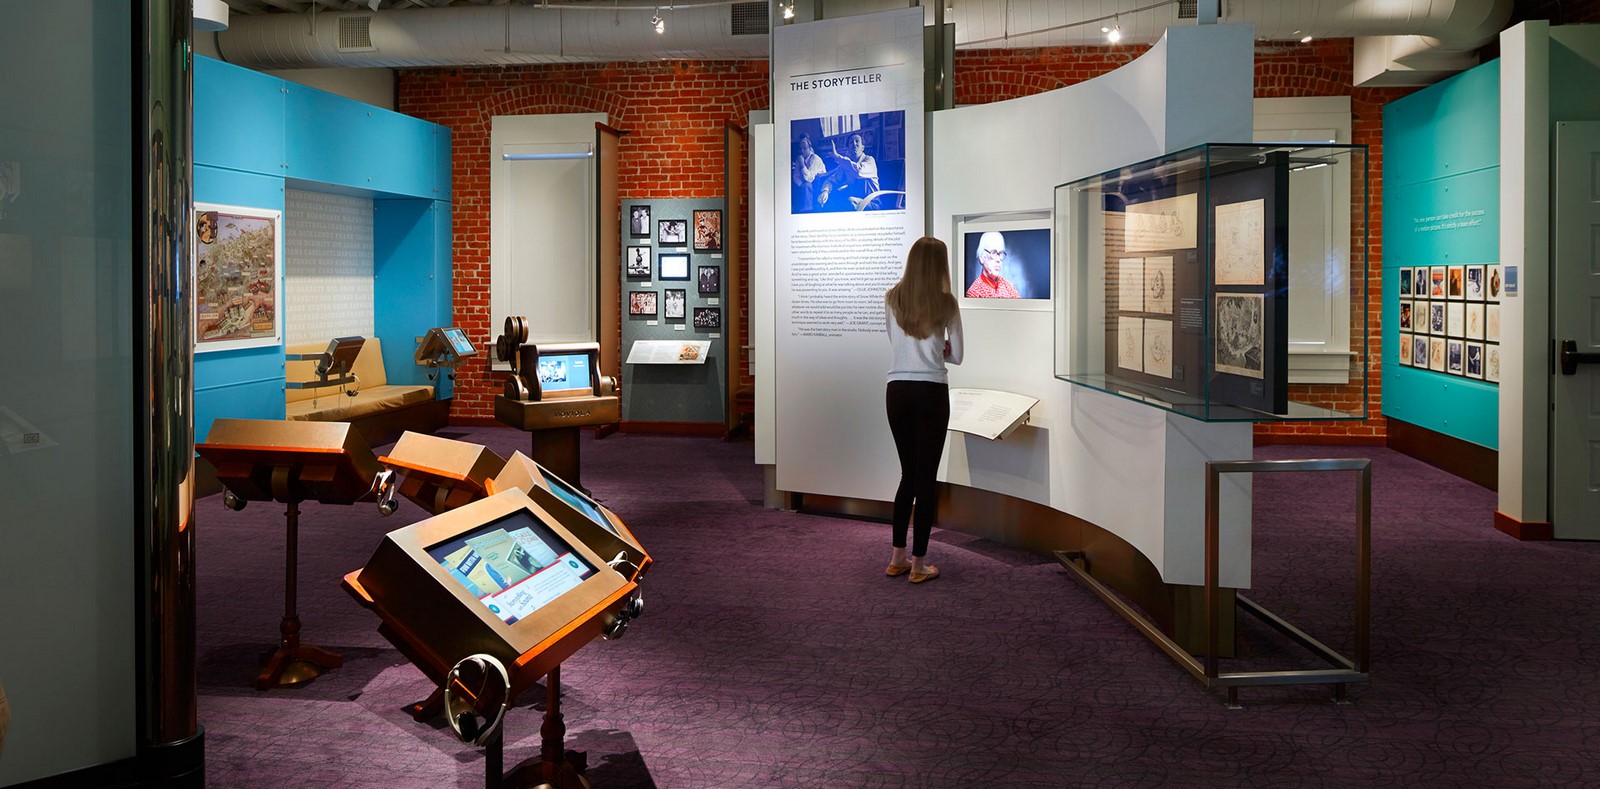 Walt Disney Family Museum by Rockwell Group- Telling a story through architecture - Sheet24